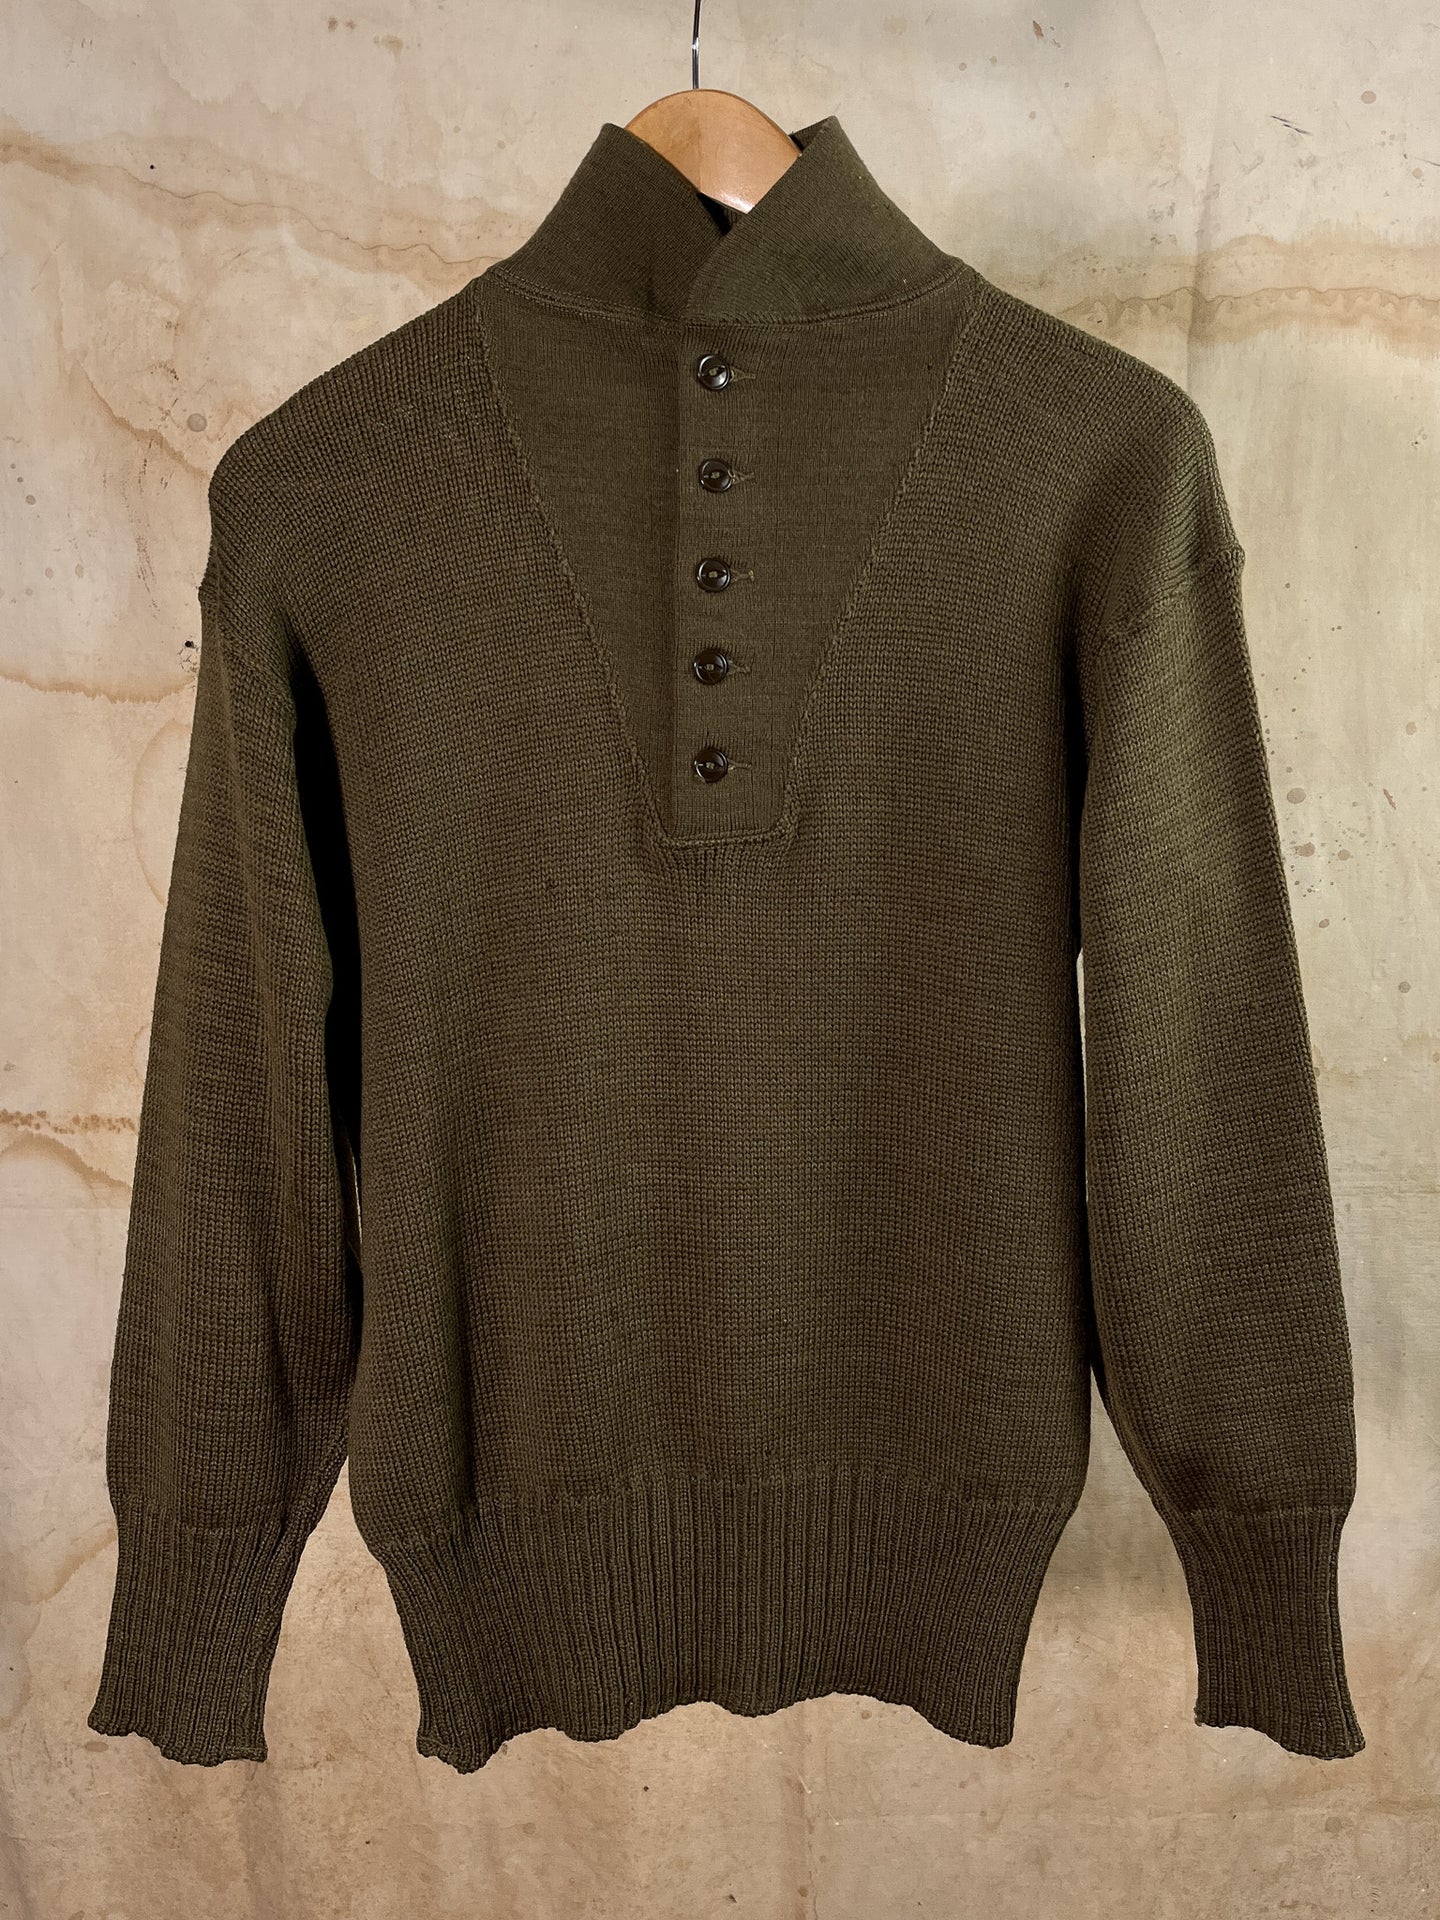 US Army Wool A1 Sweater c. 1940s-50s